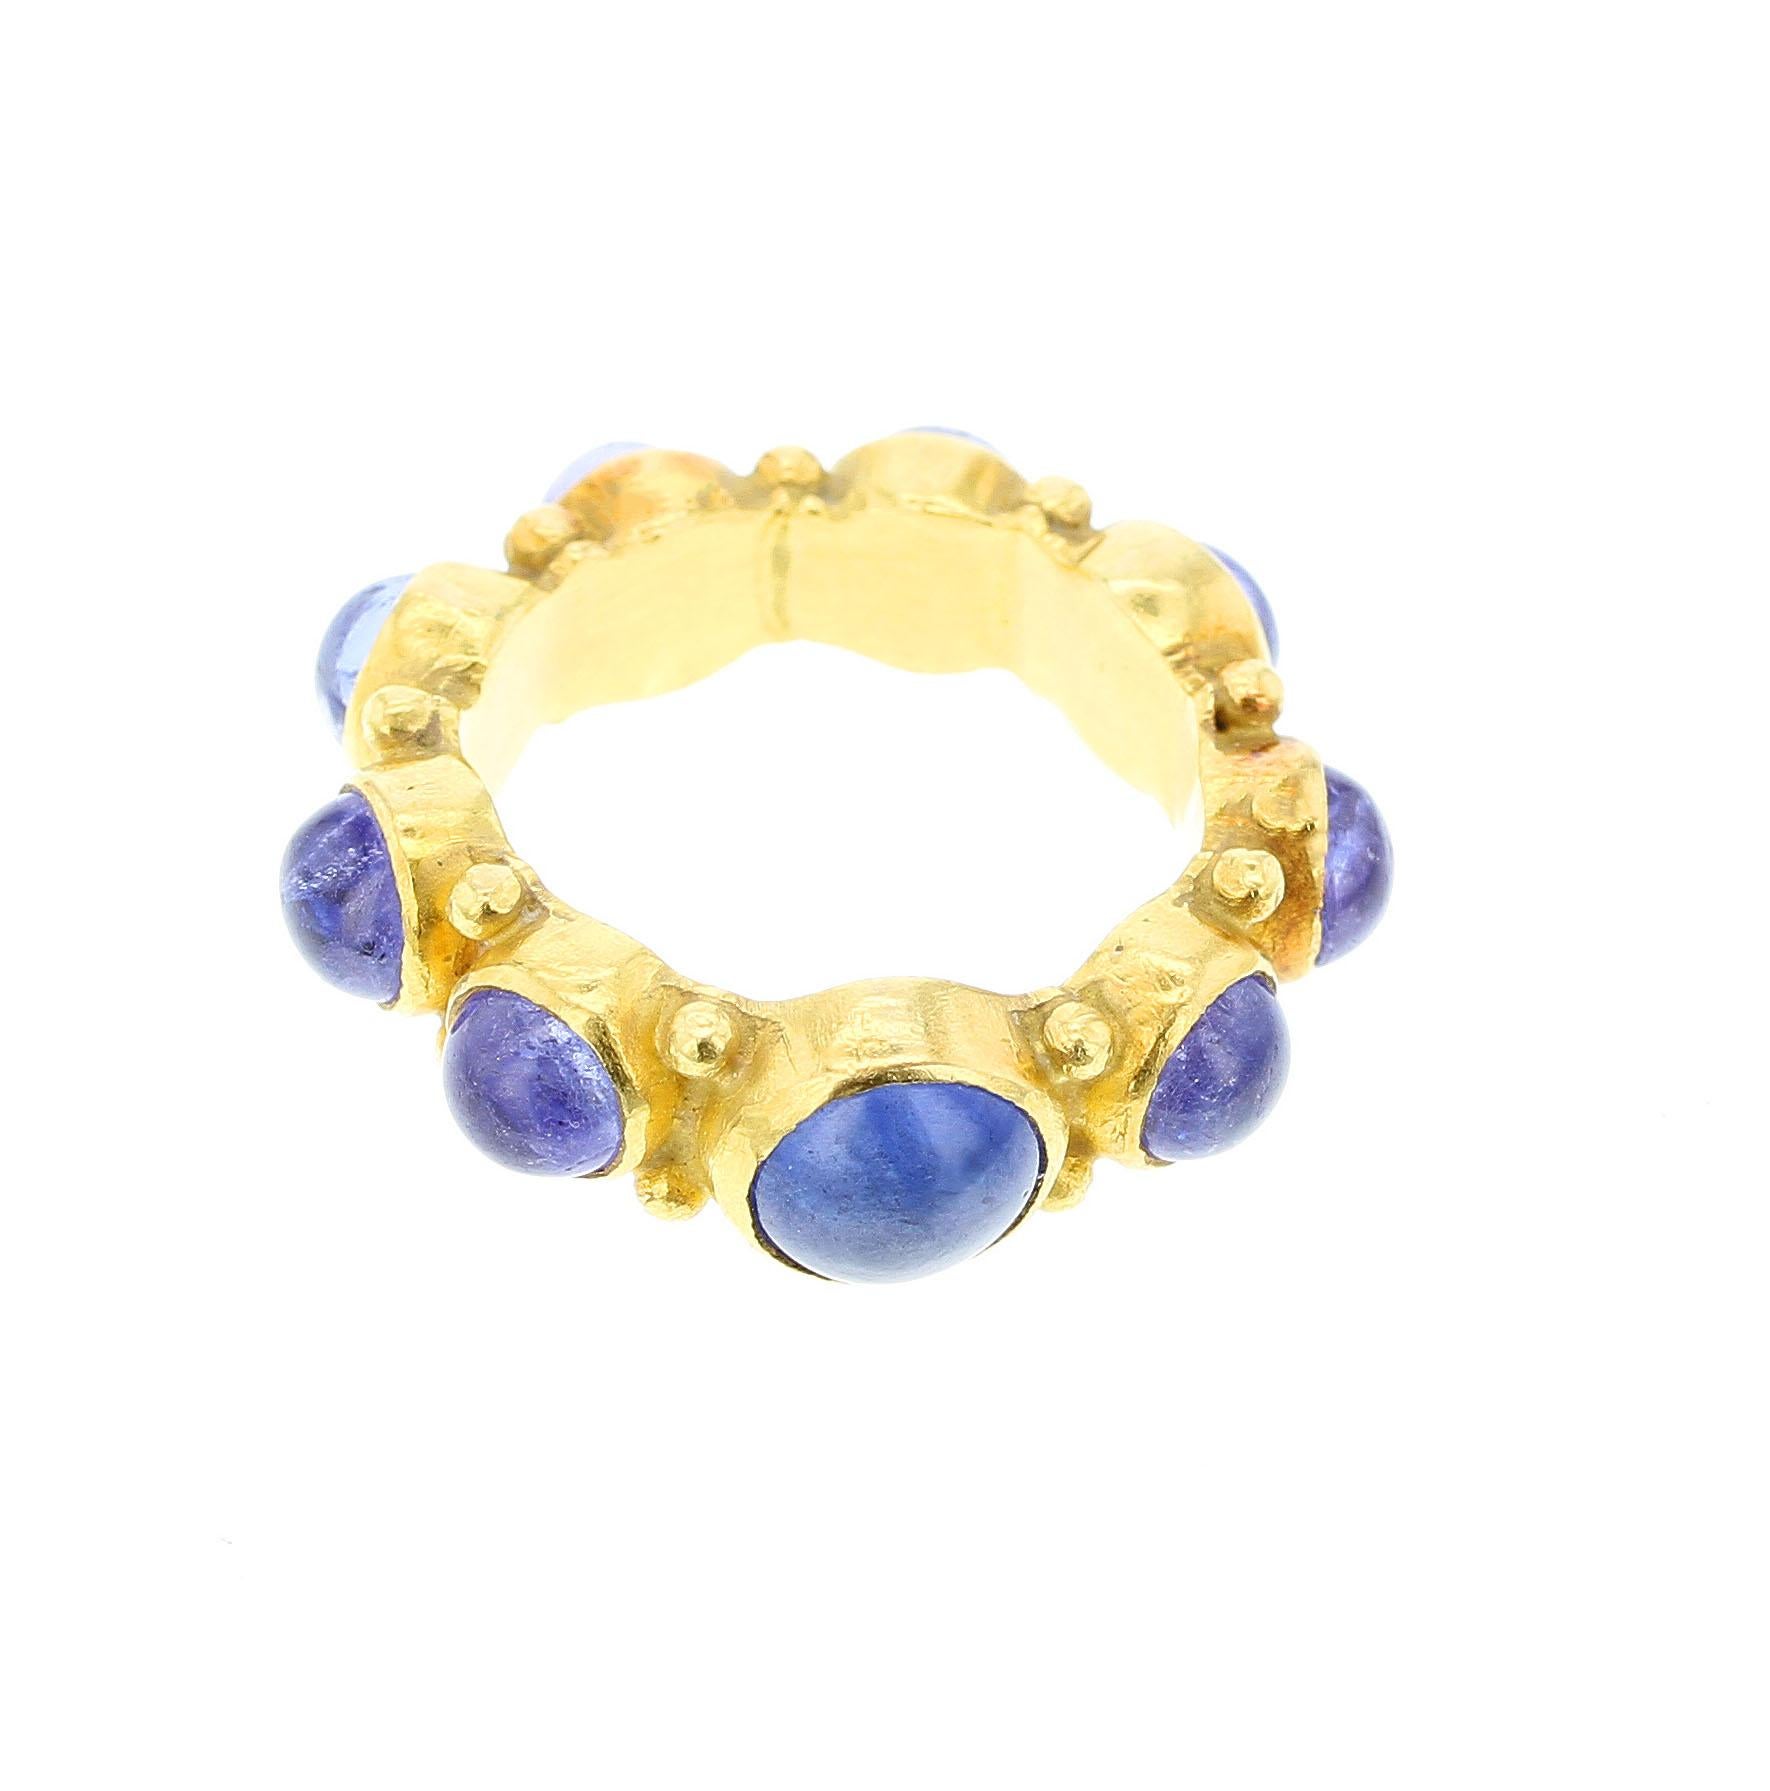 A beautiful eternity style ring with one large blue sapphire cabochon (6.5MM), surrounded by 8 blue sapphire cabochons (4.5-5MM) circling the shank with gold beads accented in between. Ring Size US 5.75. Matte finish. 